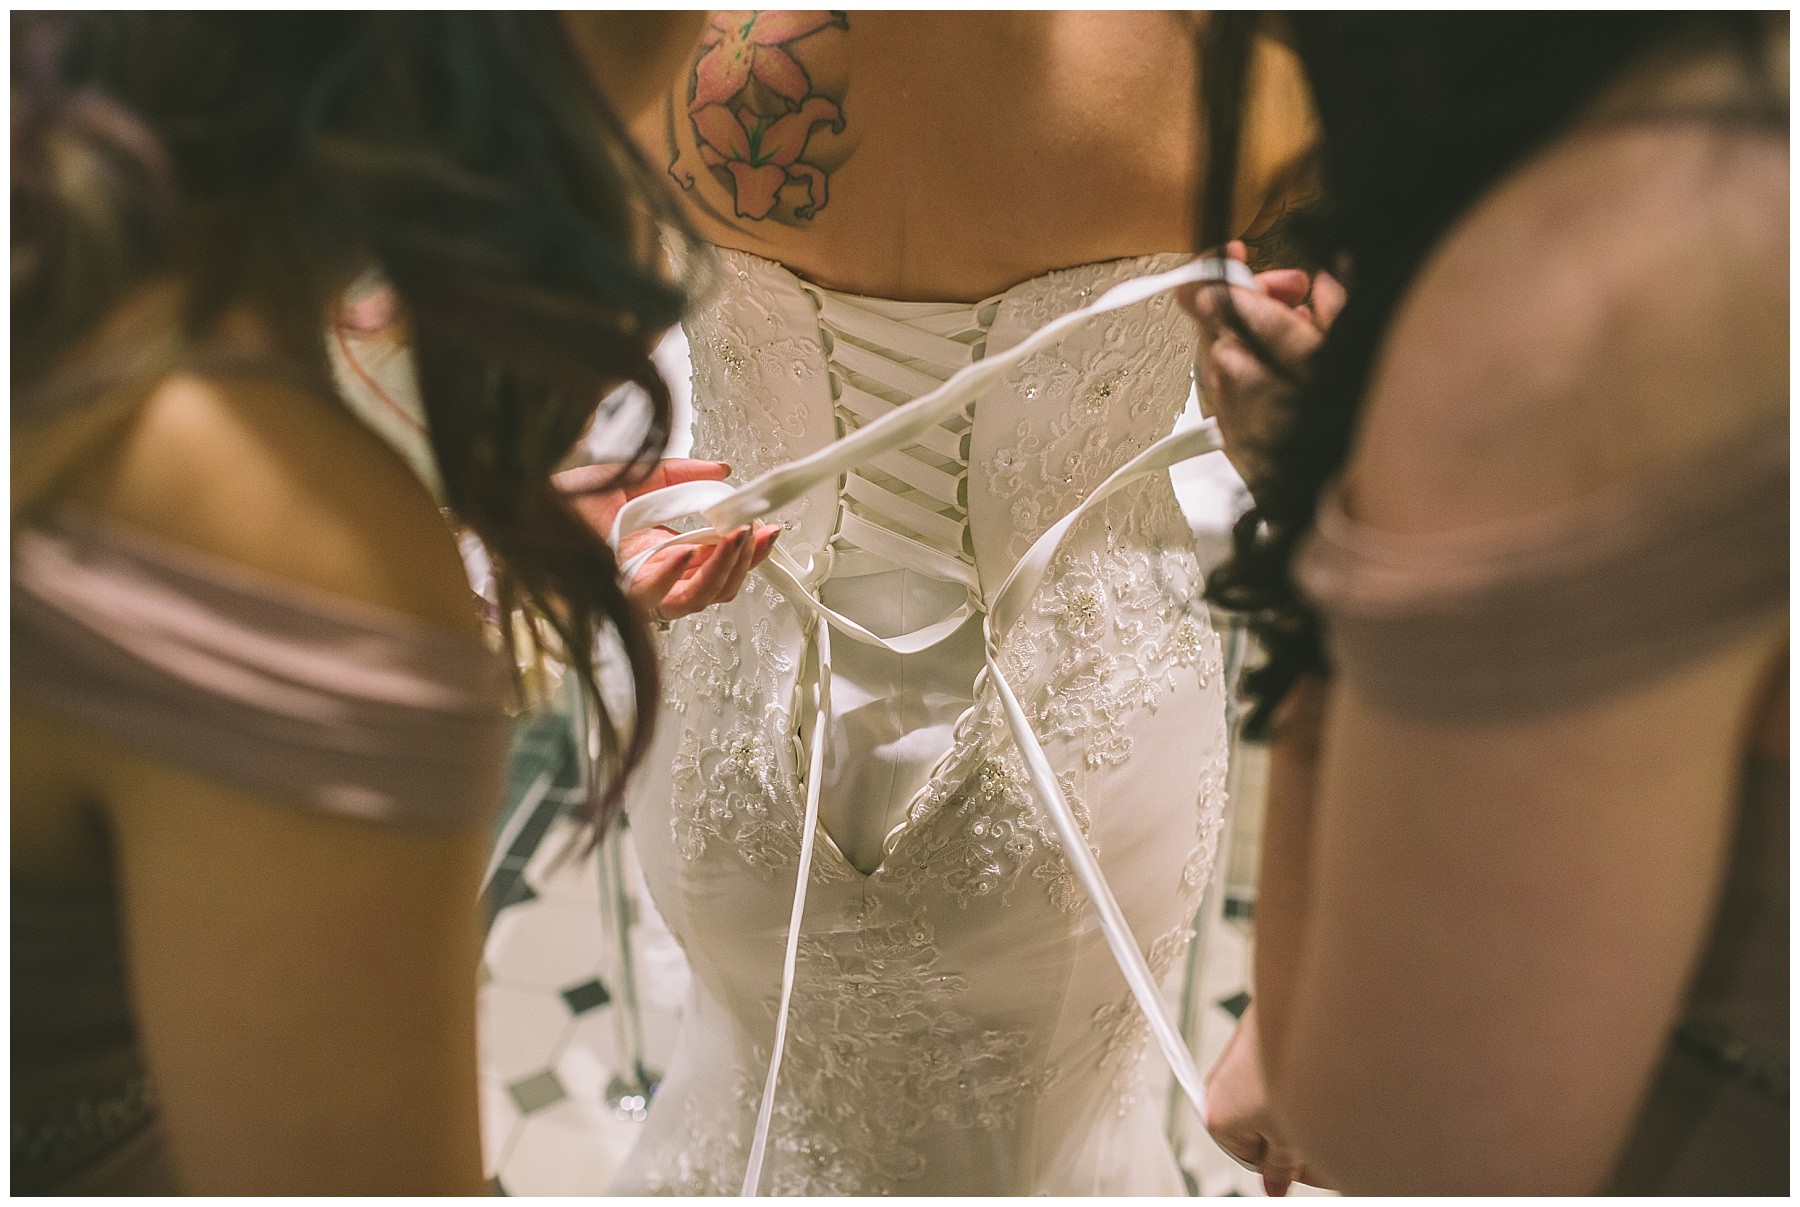 wedding dress being laced up by bridesmaids